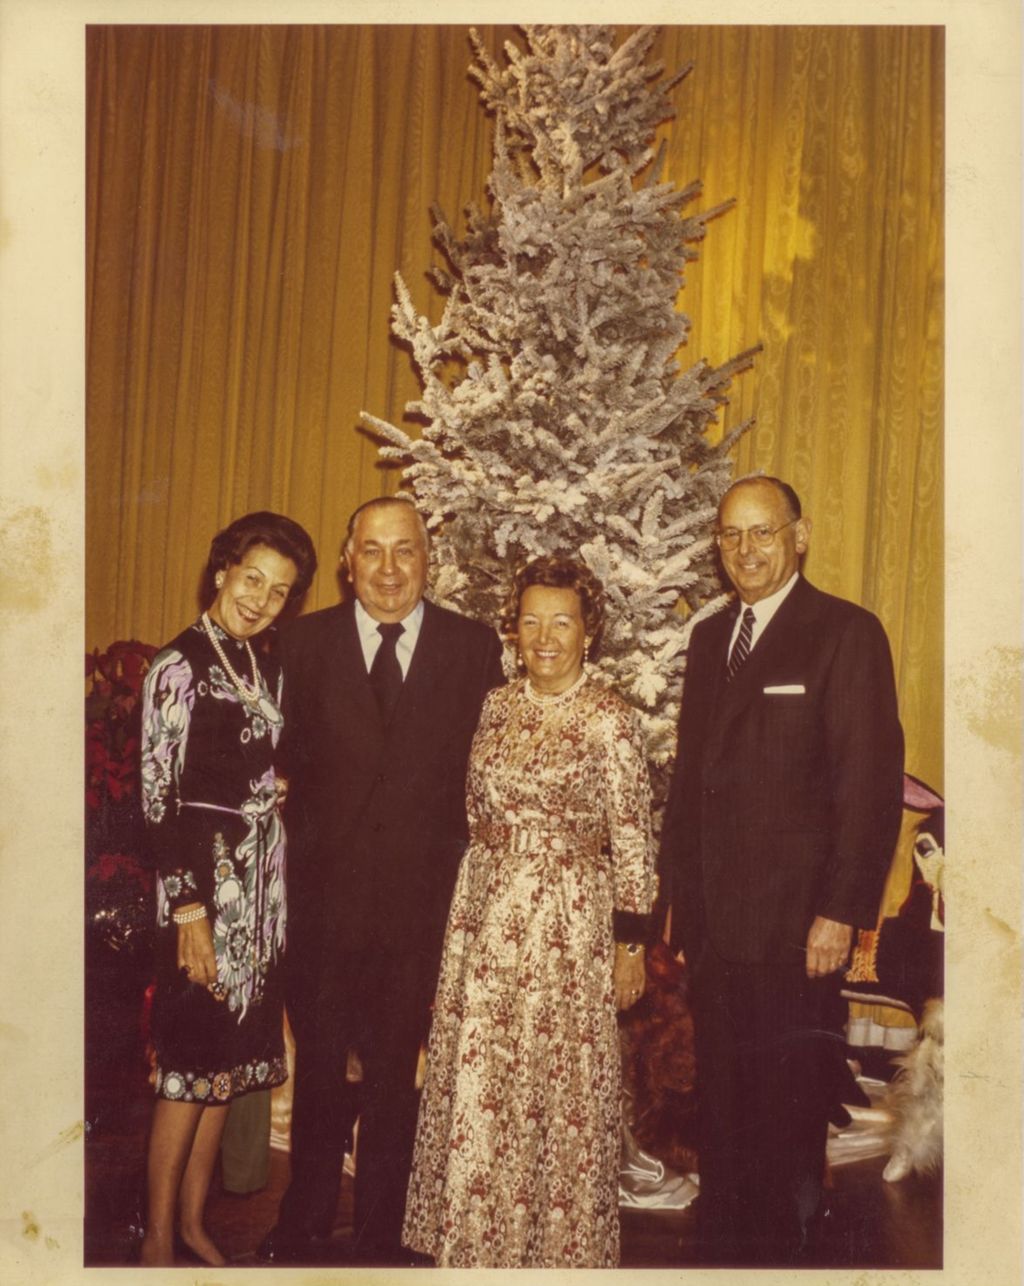 Miniature of Consular Corps Christmas reception, Richard J. and Eleanor Daley with others